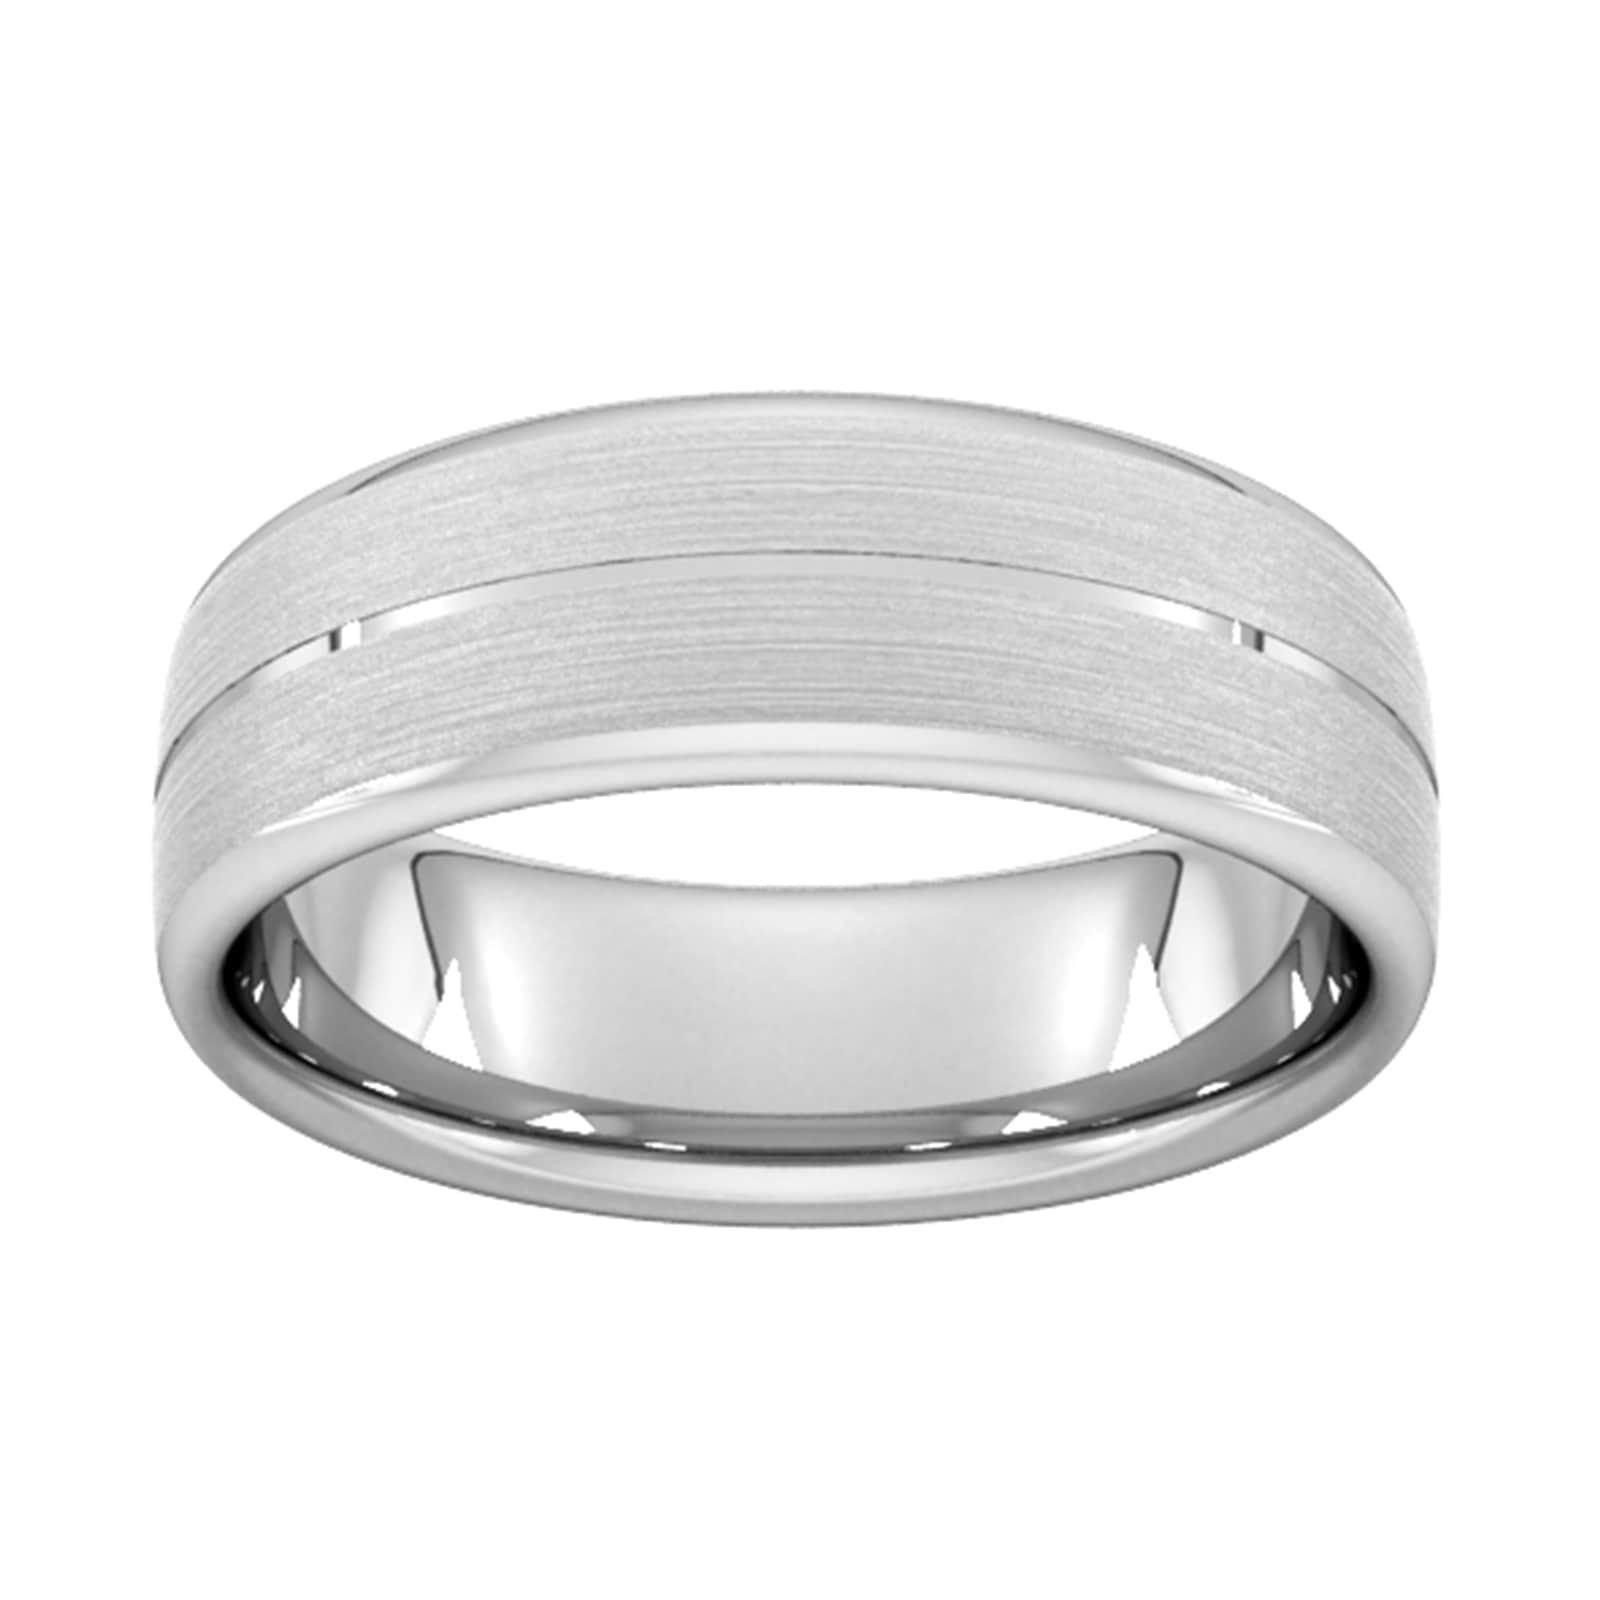 7mm Slight Court Heavy Centre Groove With Chamfered Edge Wedding Ring In 9 Carat White Gold - Ring Size M